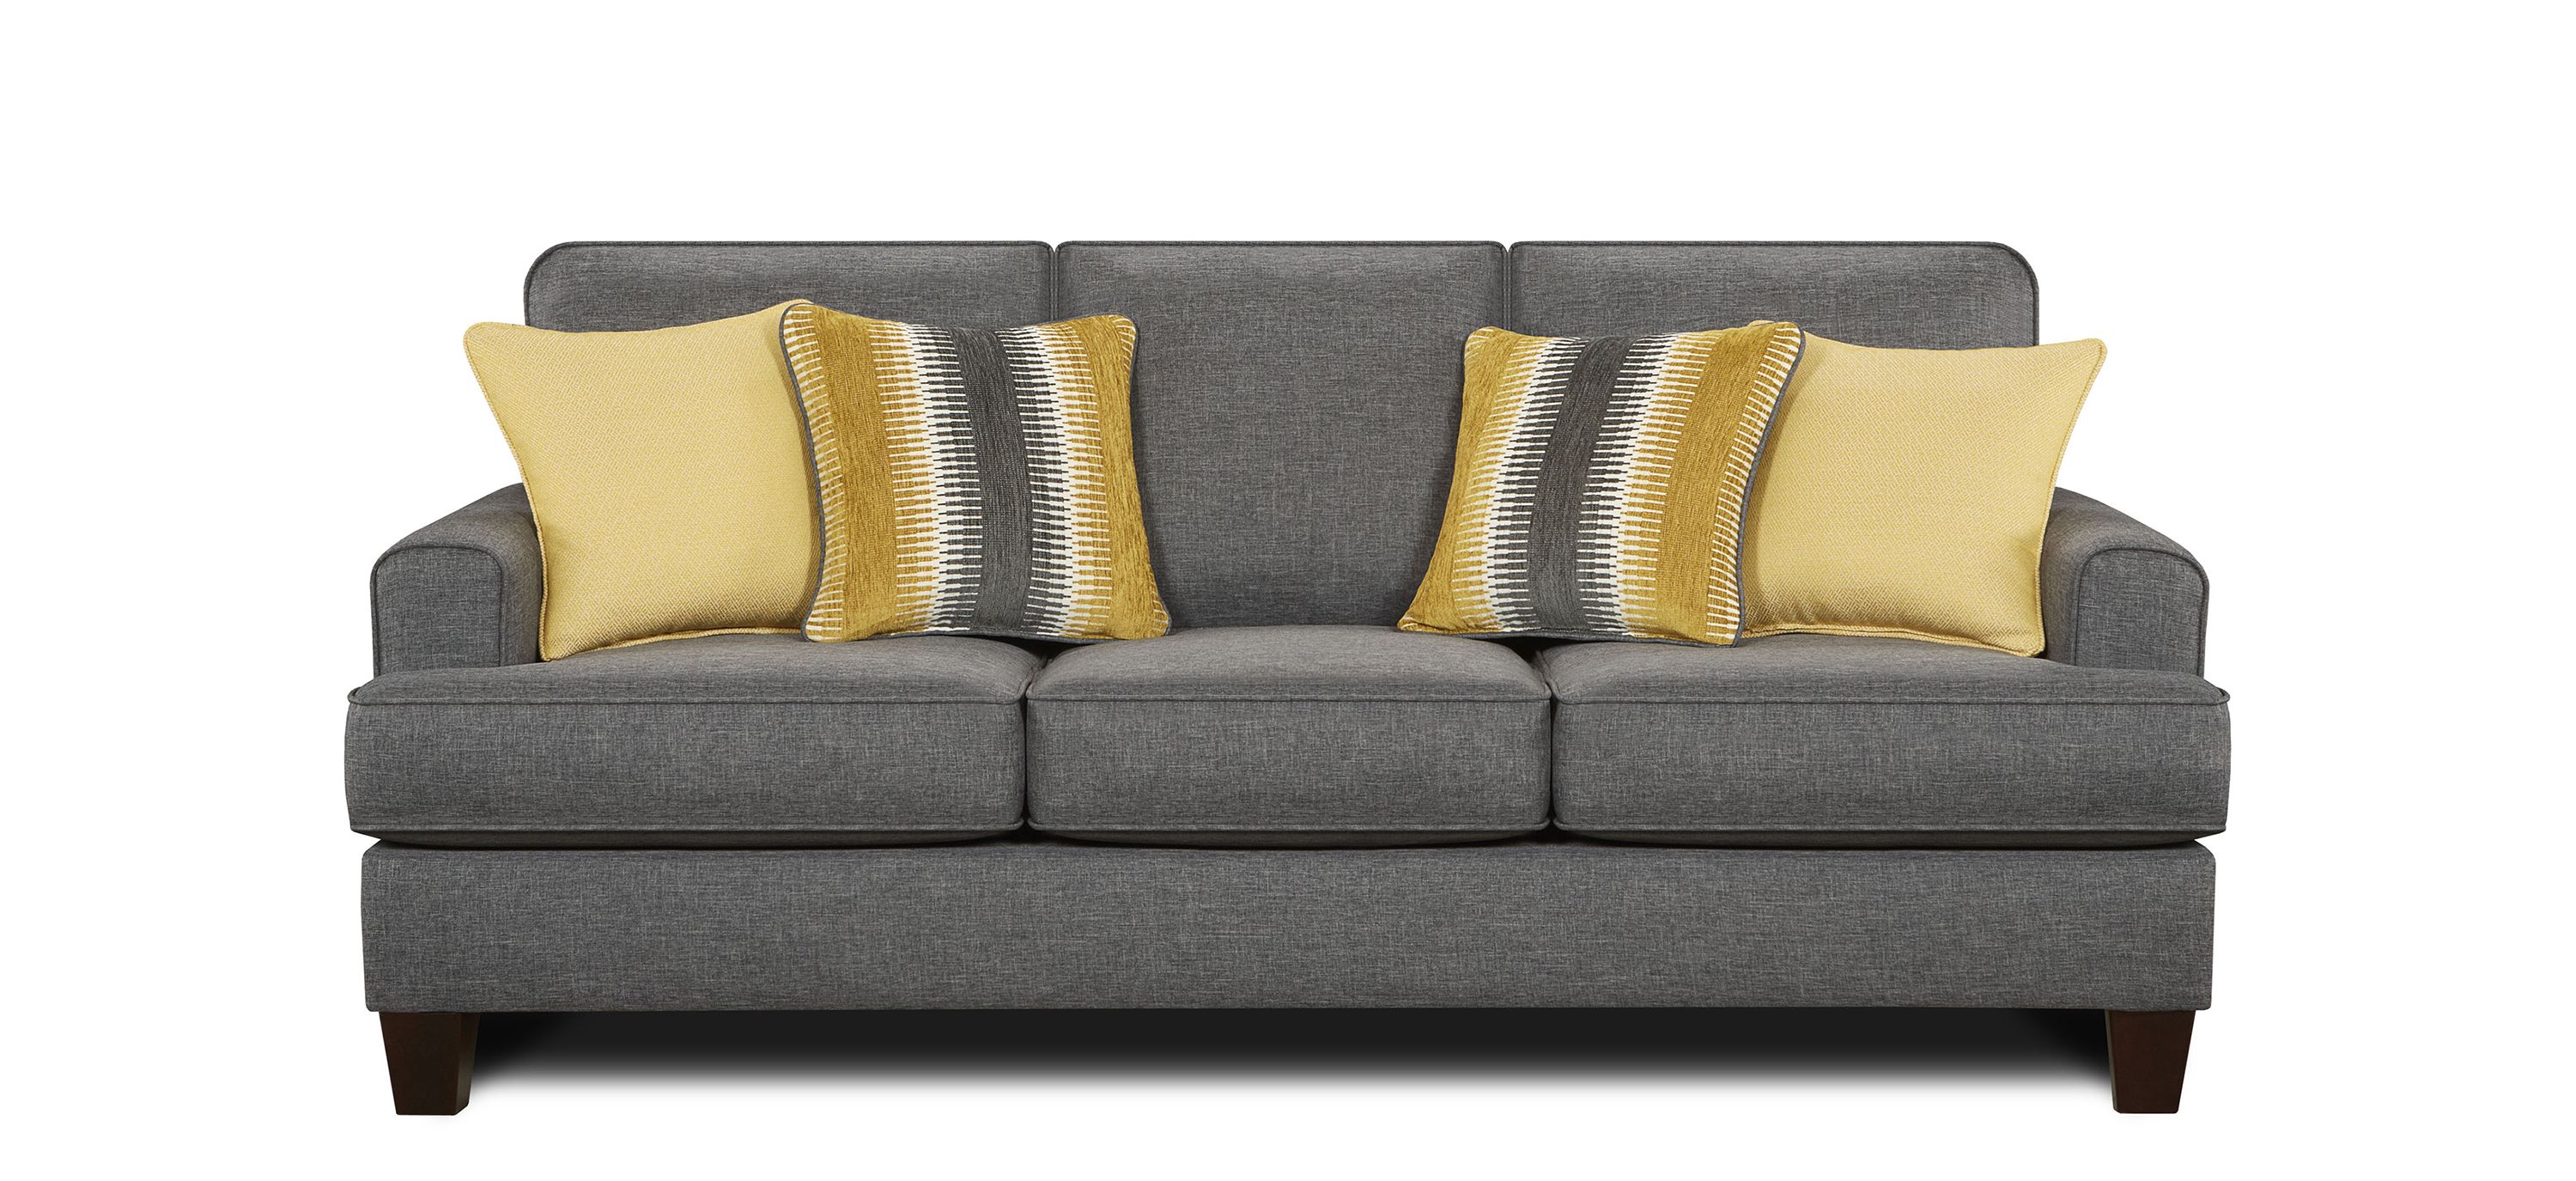 Willoughby Sofa